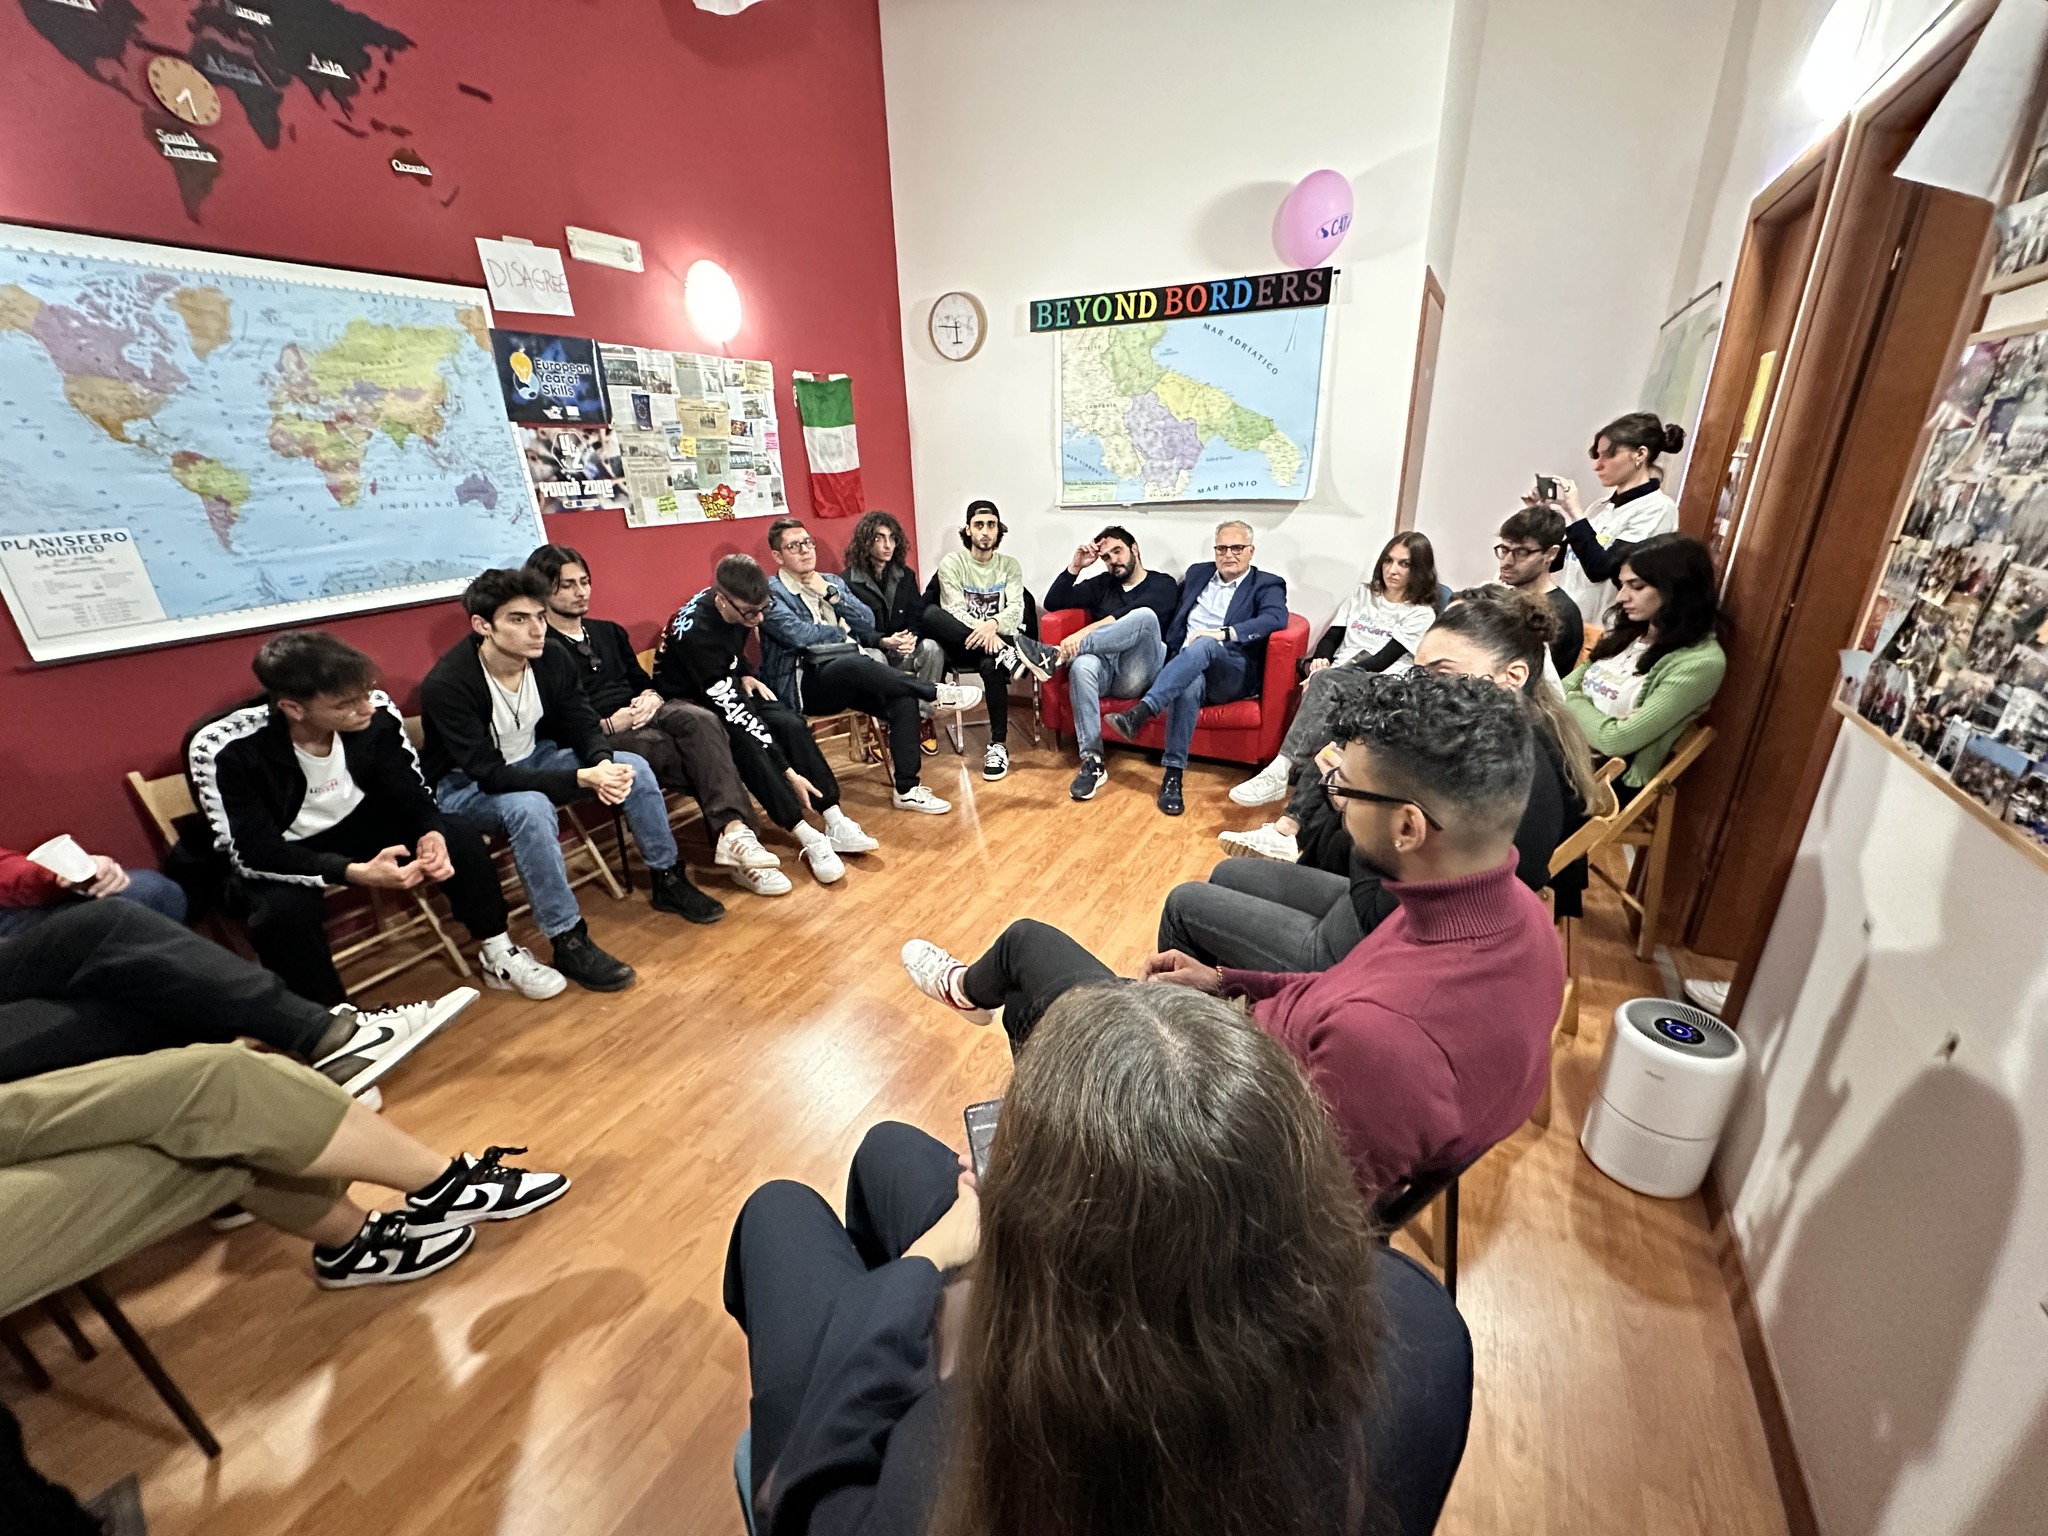 European Youth Voices – Youth dialogues with decision makers